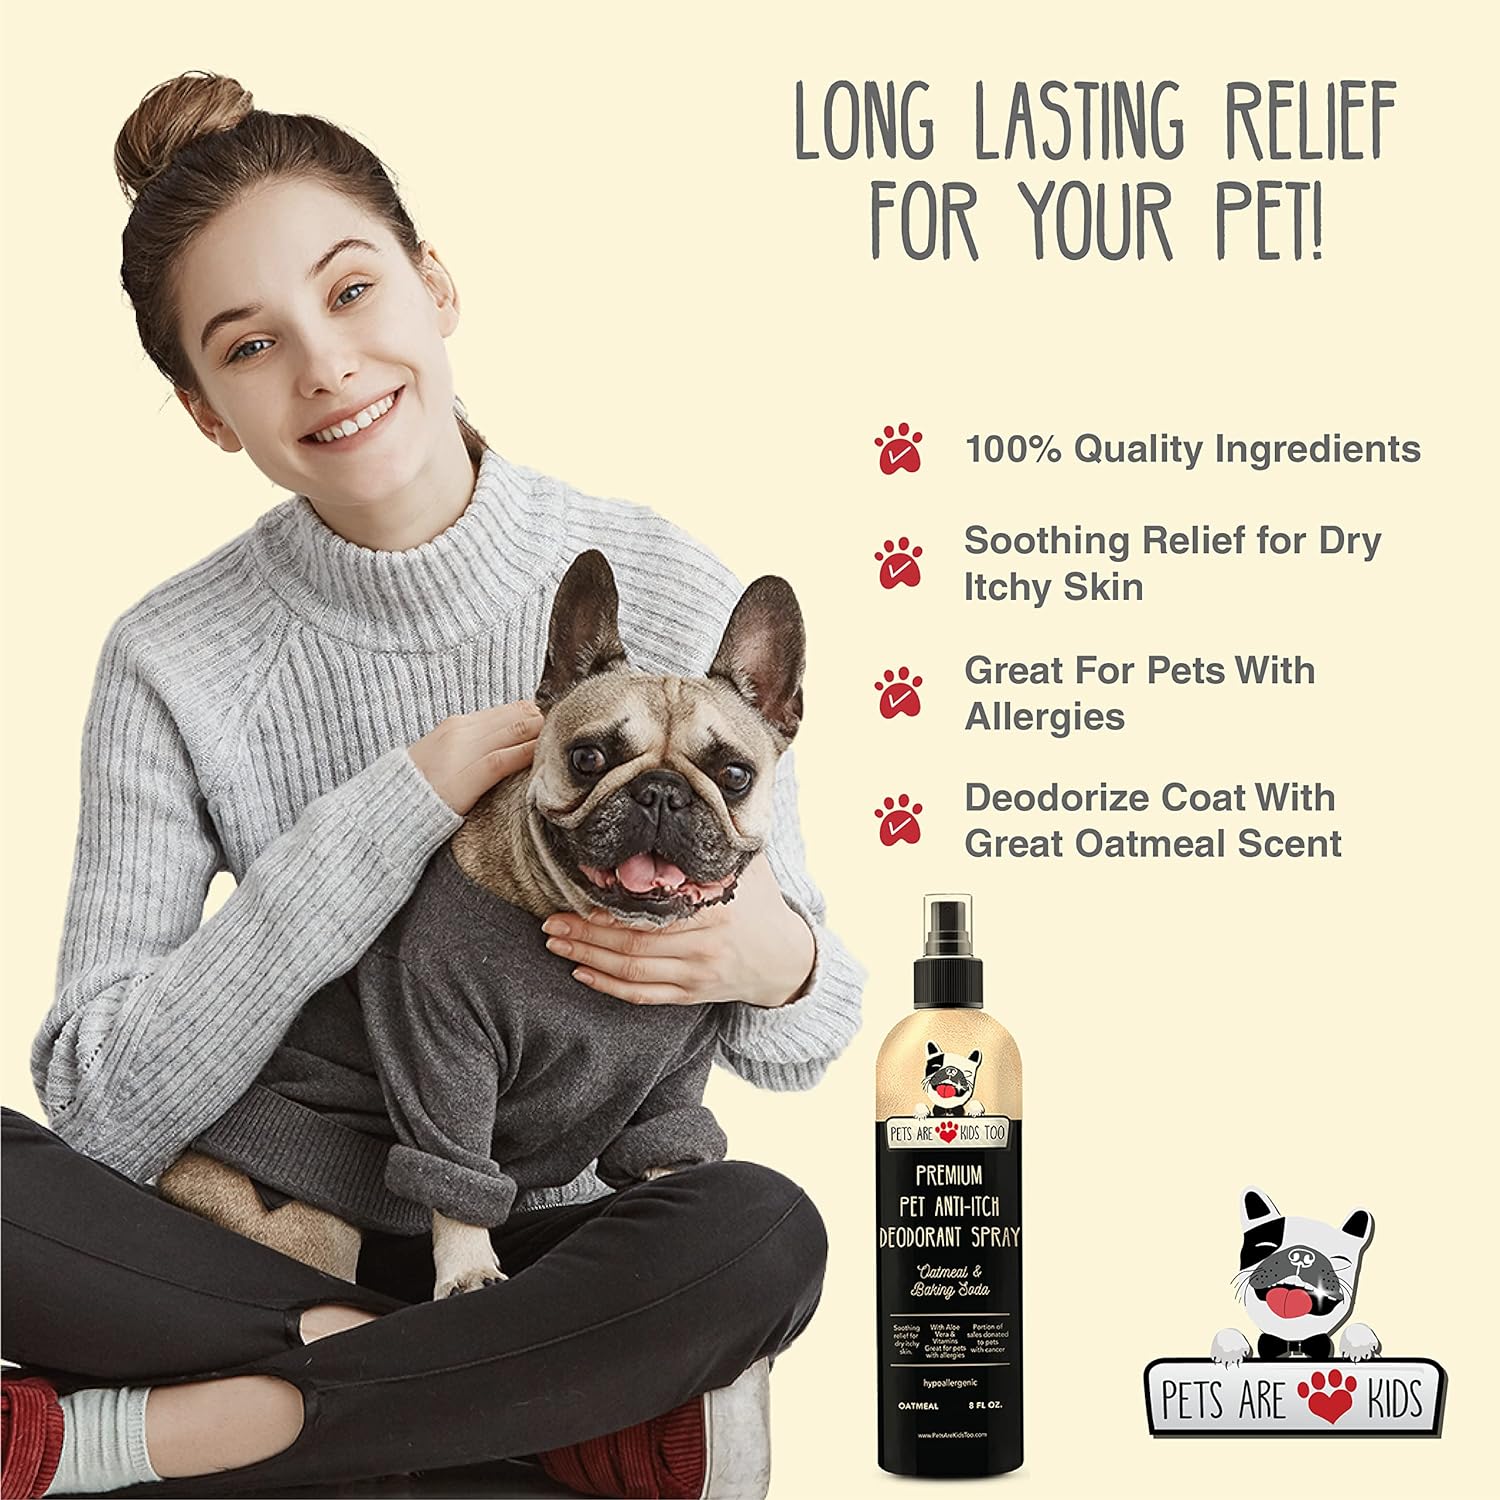 Long lasting relief